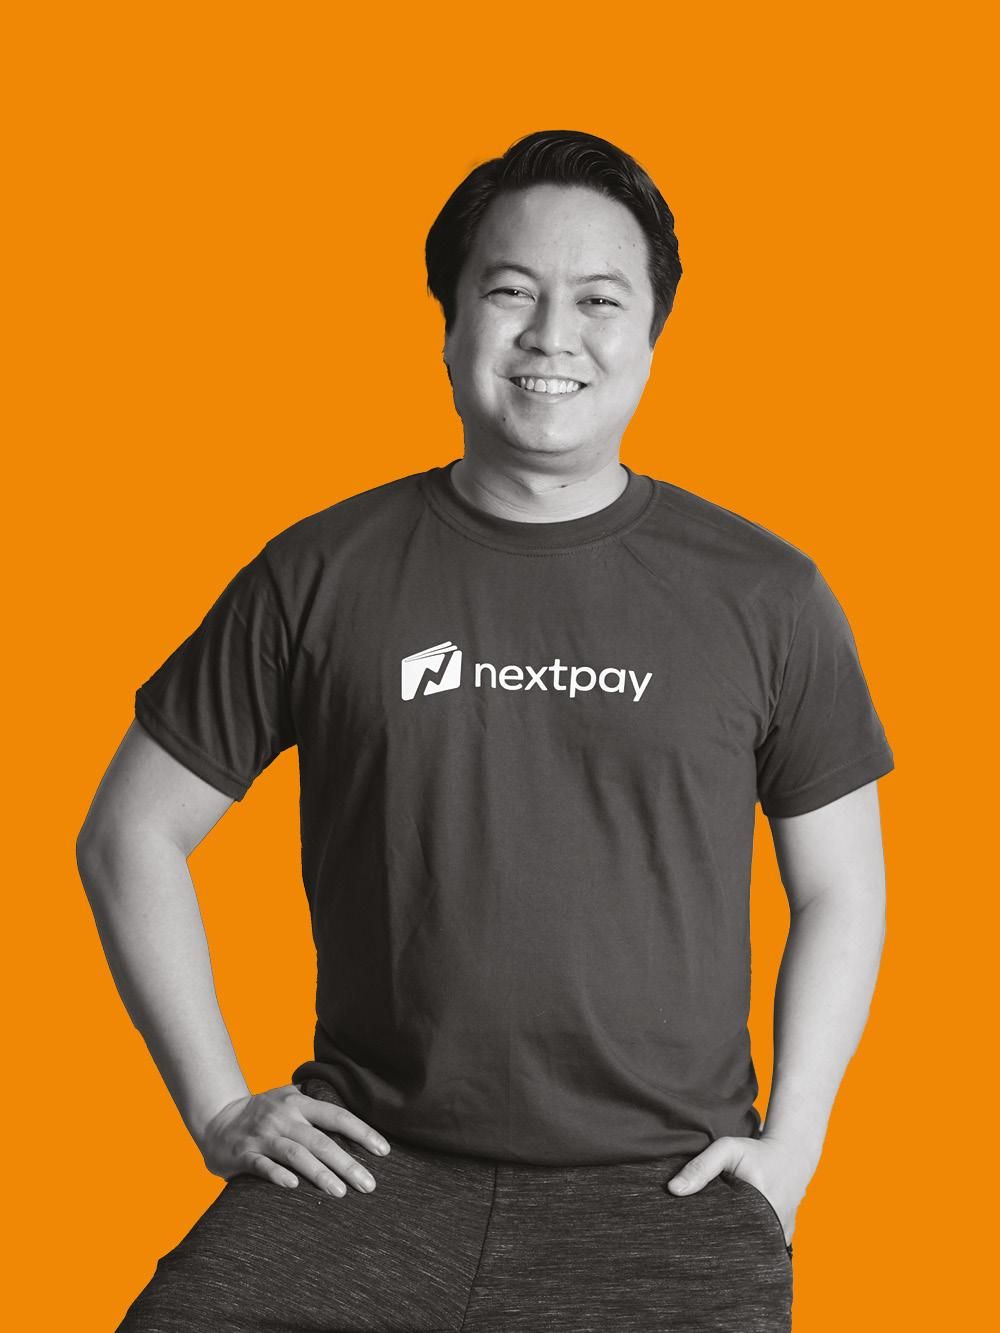 Don Pansacola, NextPay CEO on self-improvement for tech startup founders